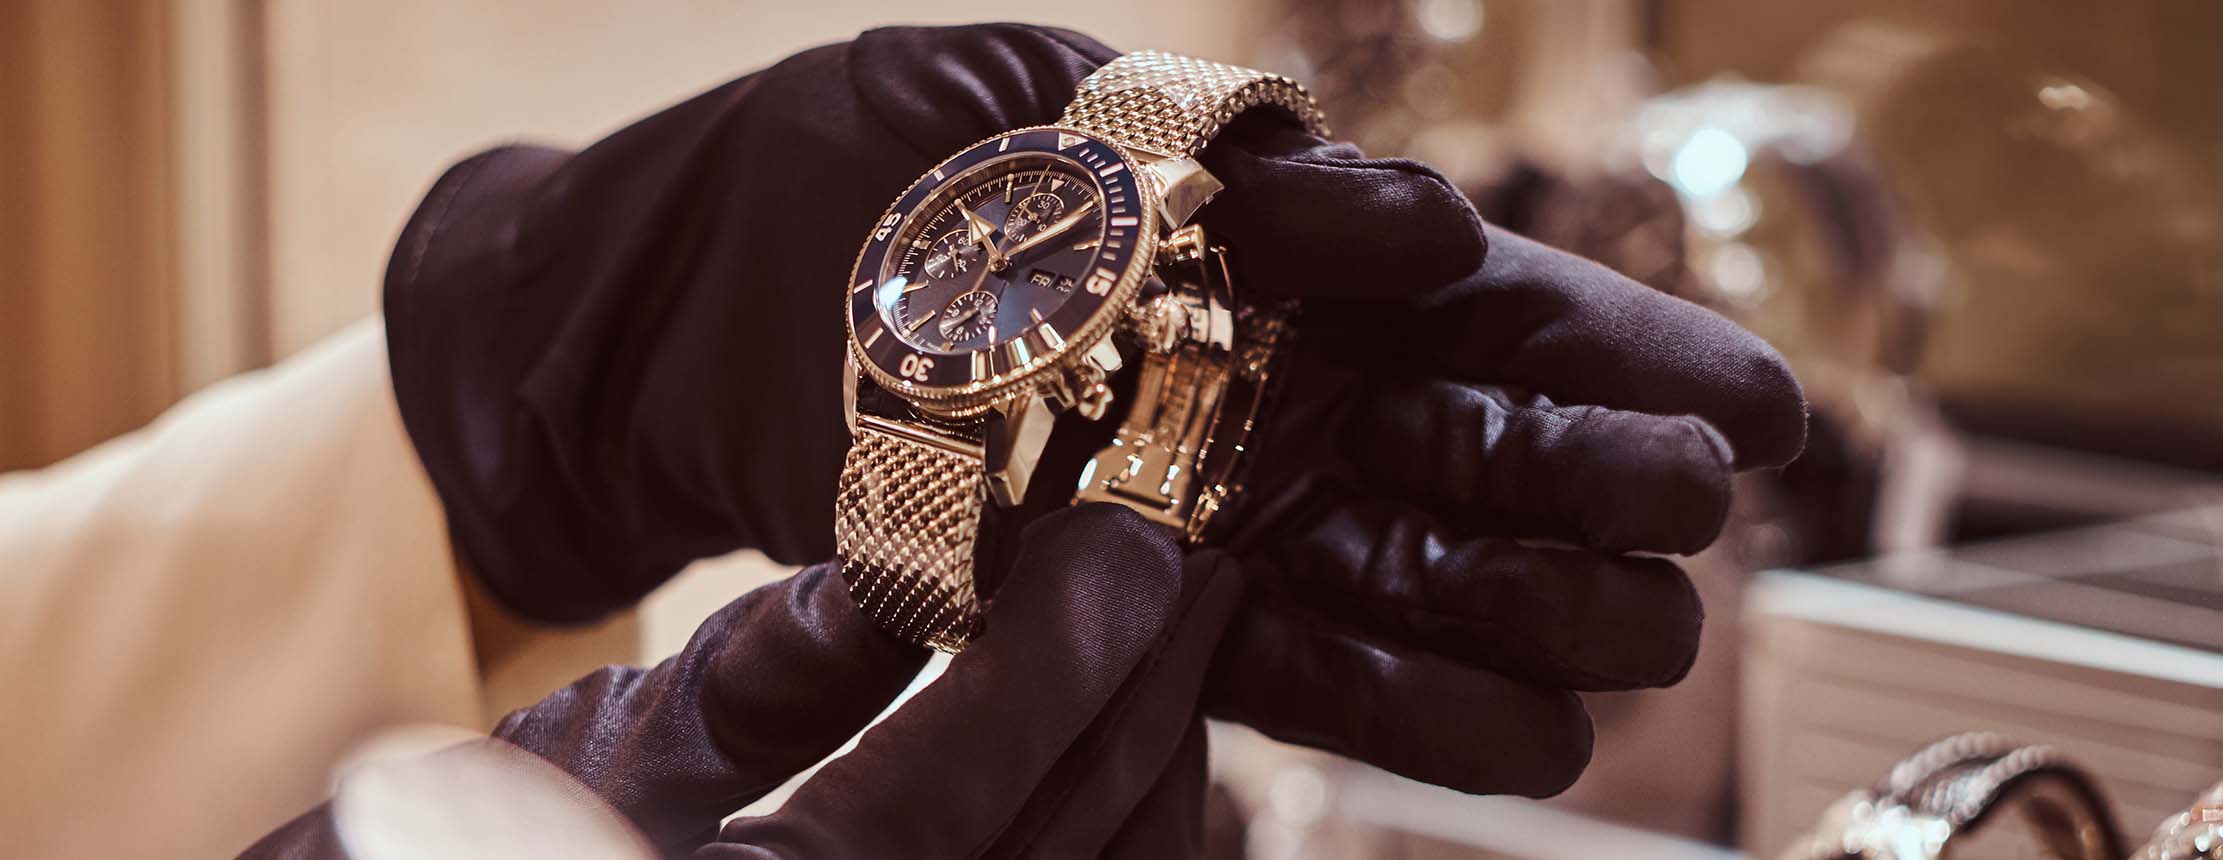 Gloved hands hold expensive luxury watch